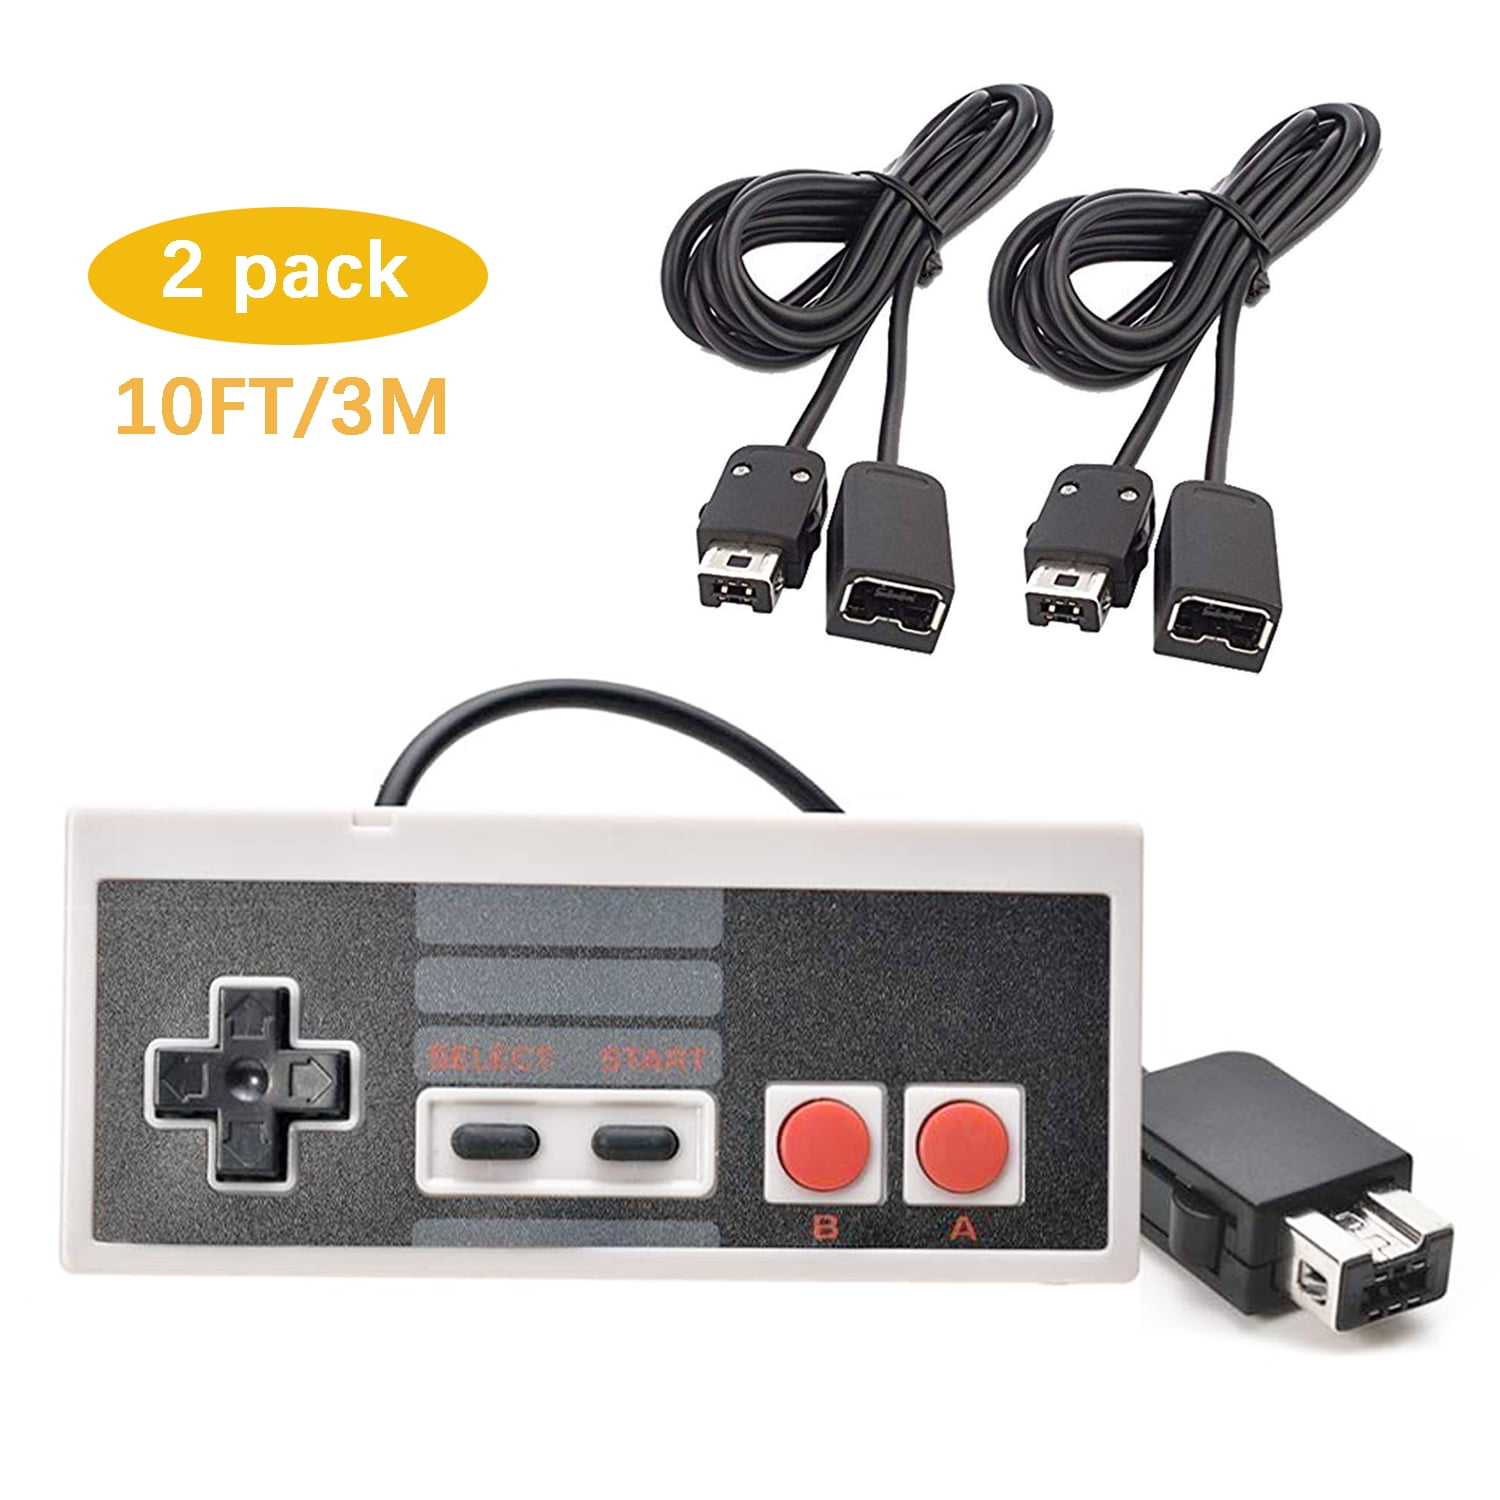 Accessories BRAND NEW Retro 8 Nes Classic Controller Extension Cable 